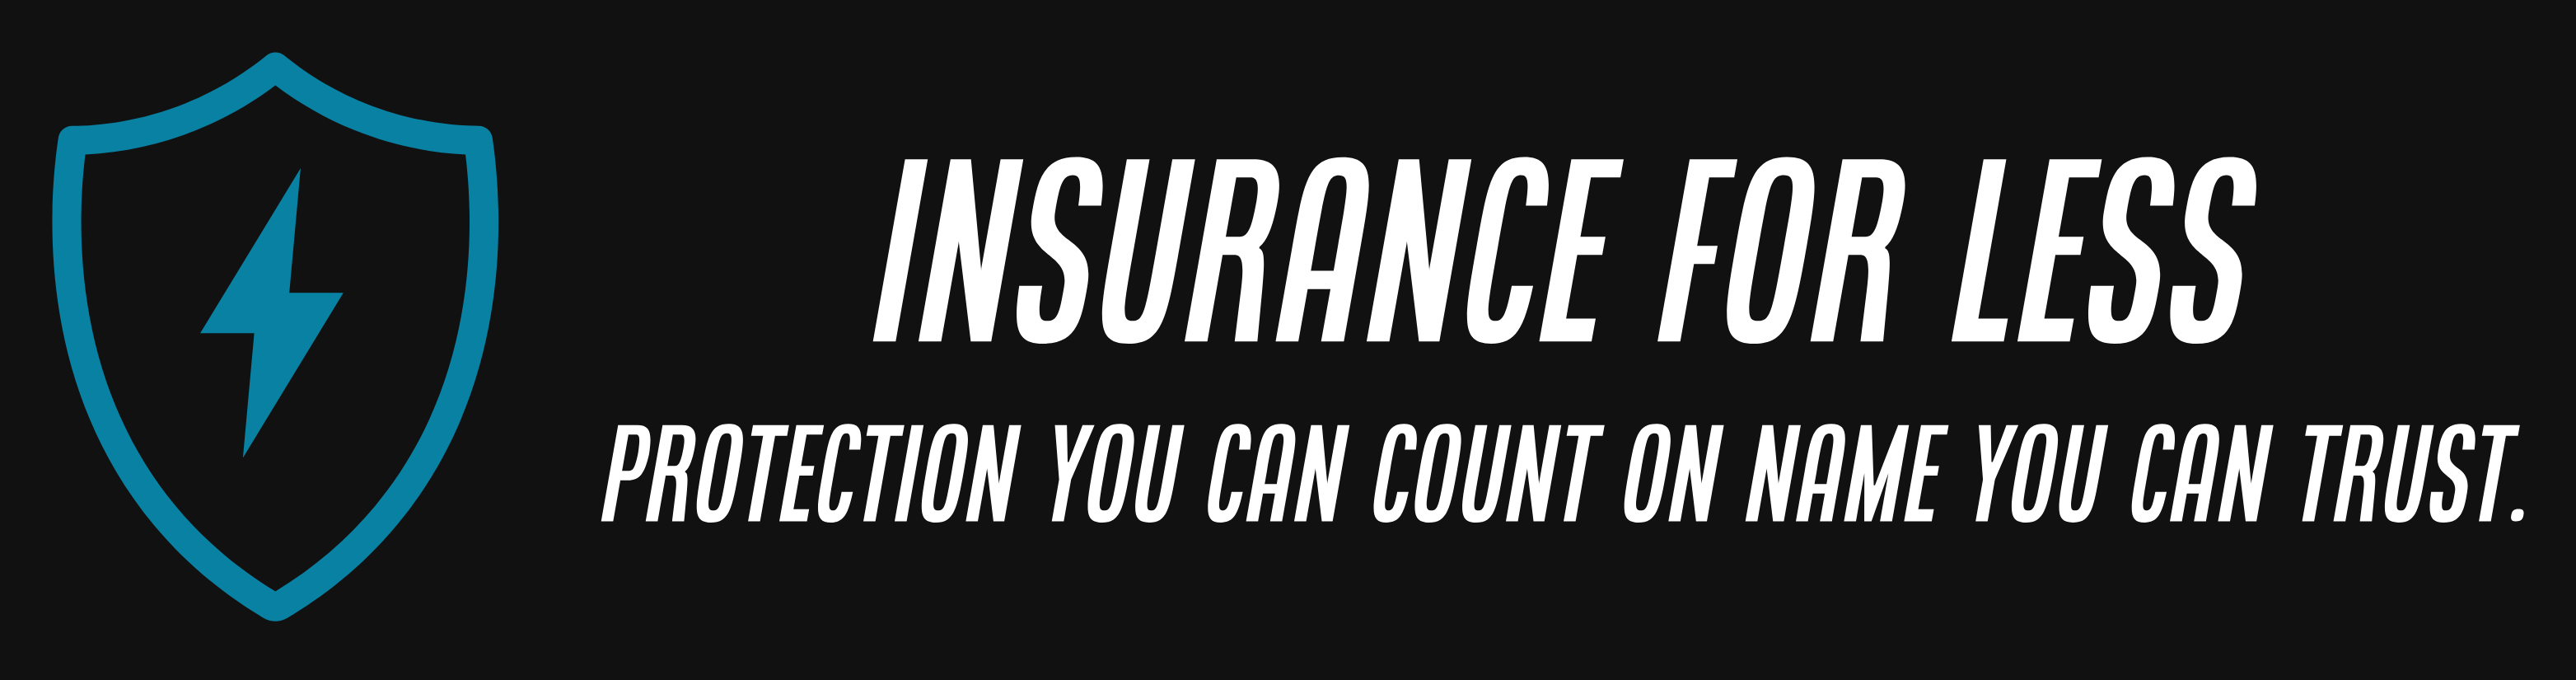 Insurance For Less protection you can count on name you can trust